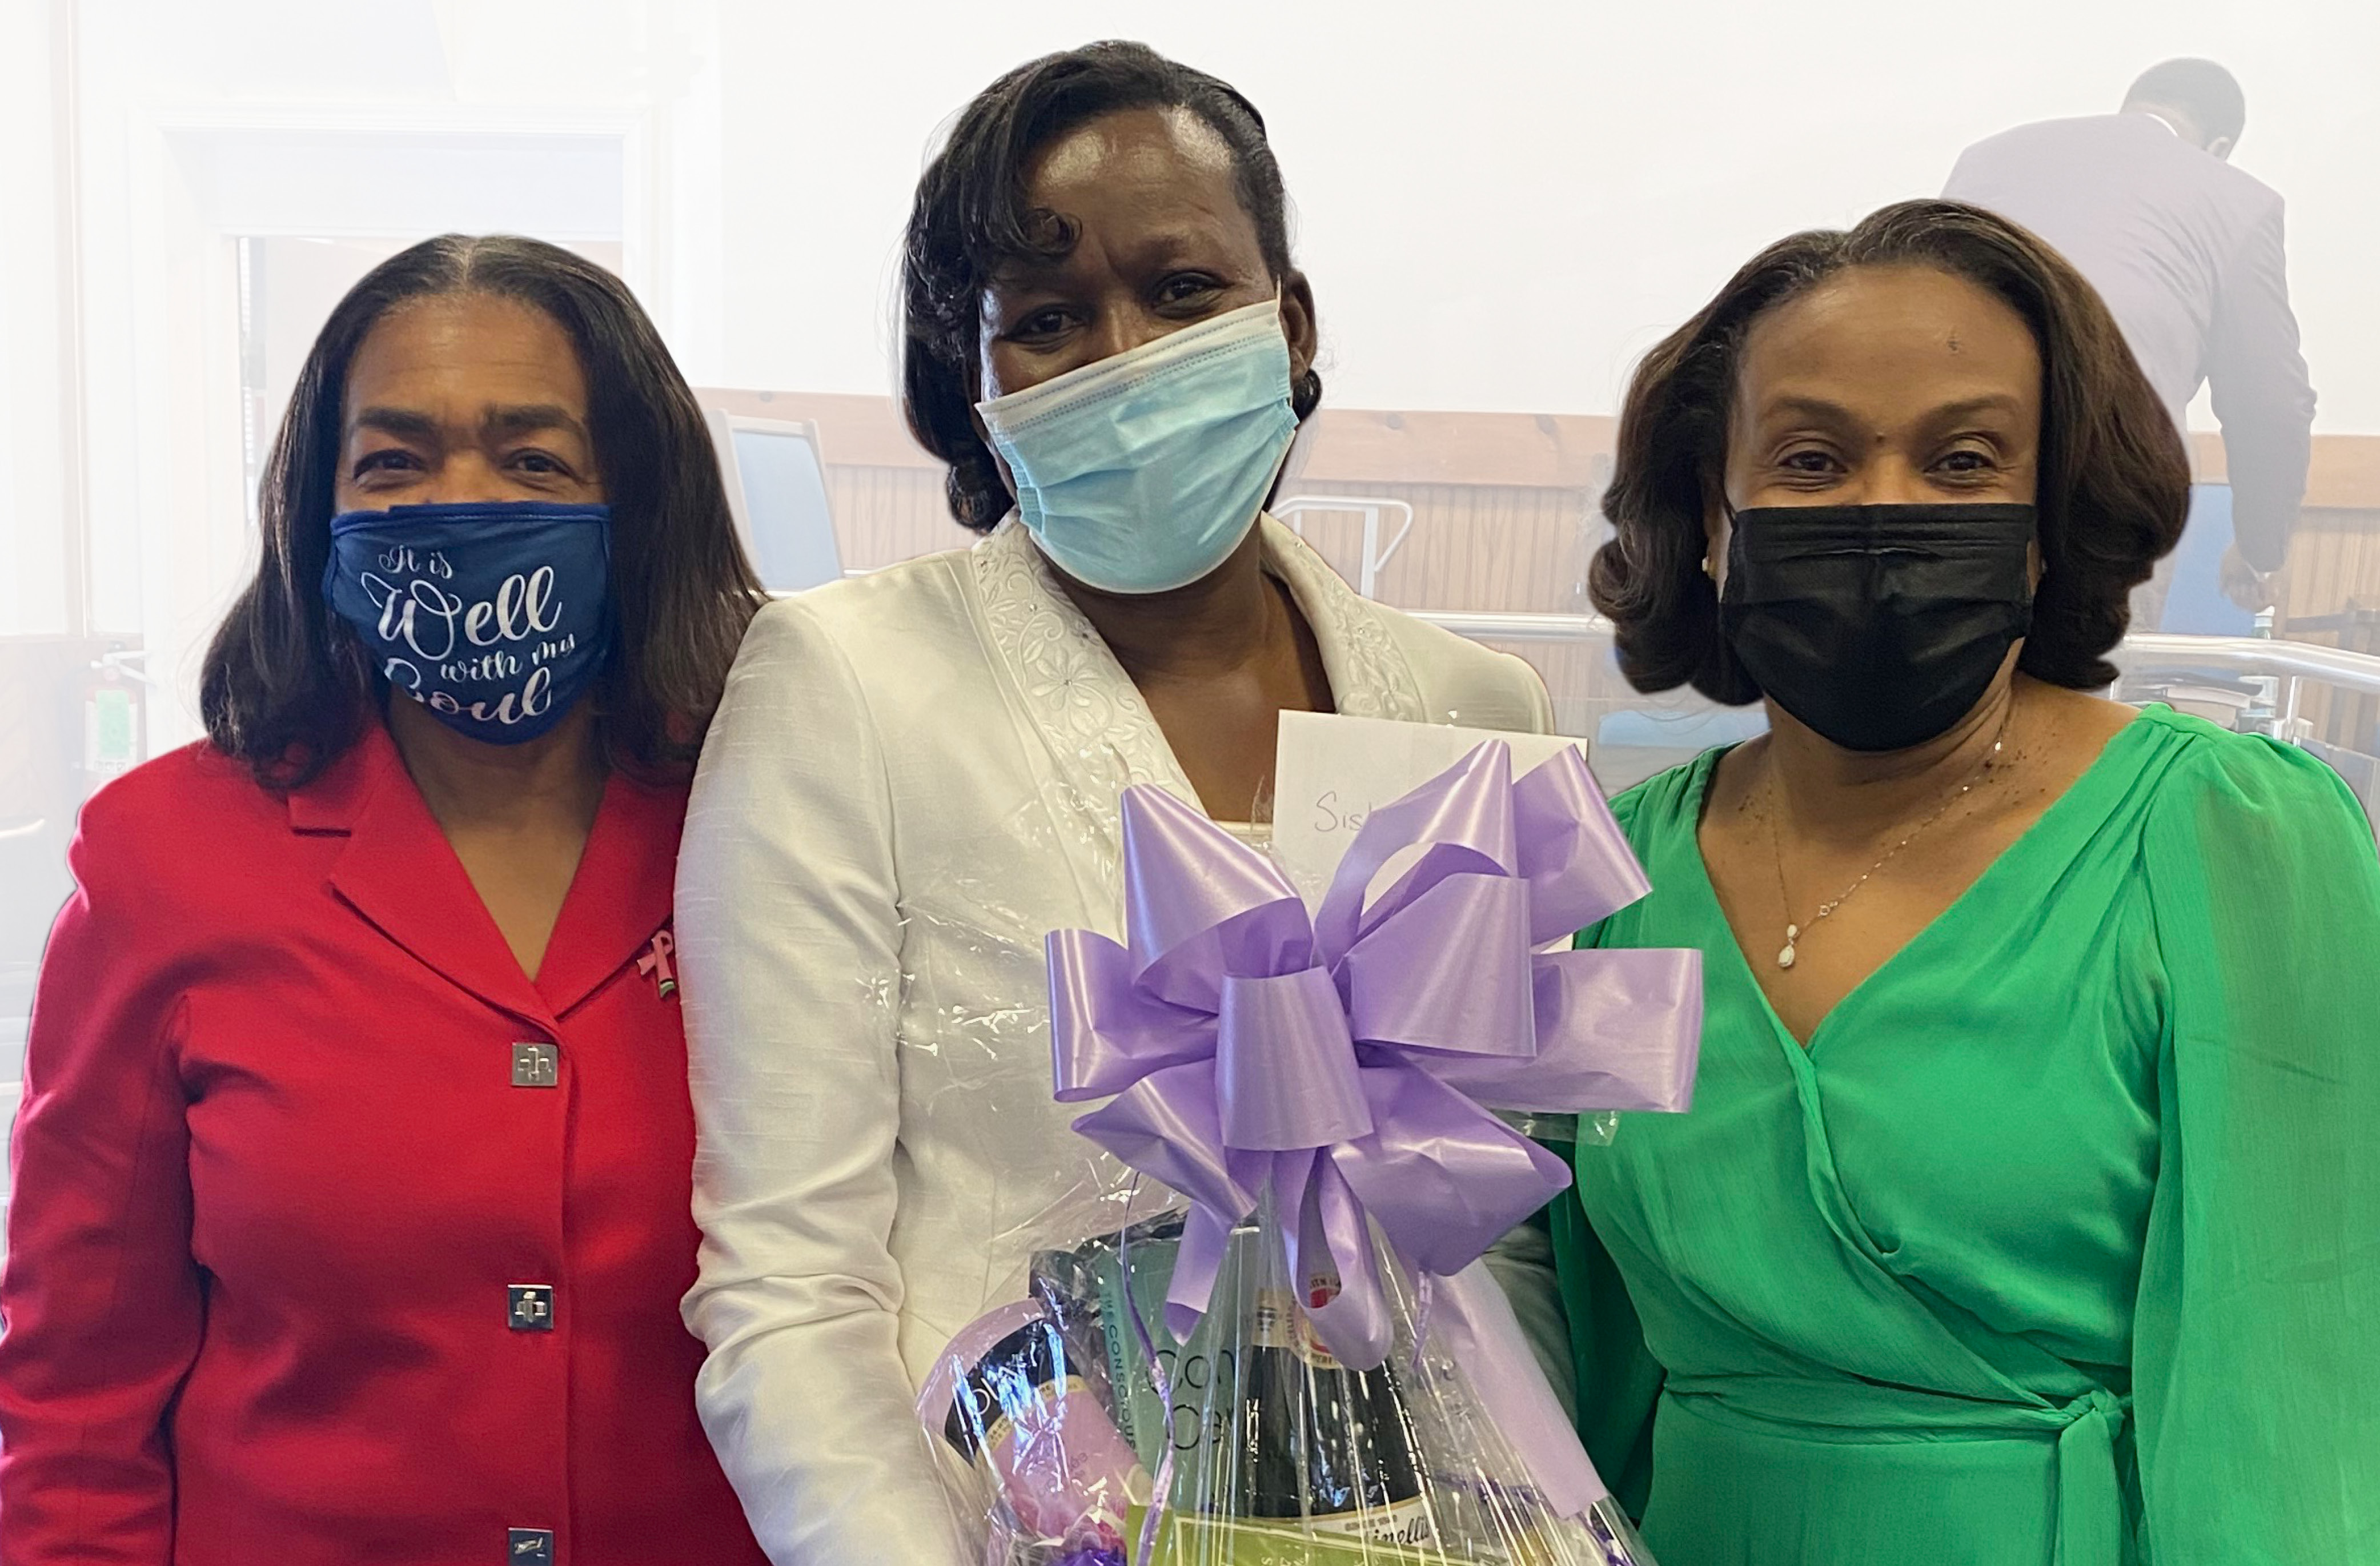 Three women in Sunday church dresses and face masks stand together. Left, Olive Campbell, coordinator of Caring for the Caregiver; Center, Neva Denton, a caregiver, holding a gift basket with a large purple ribbon; Right, Grace Hanson.